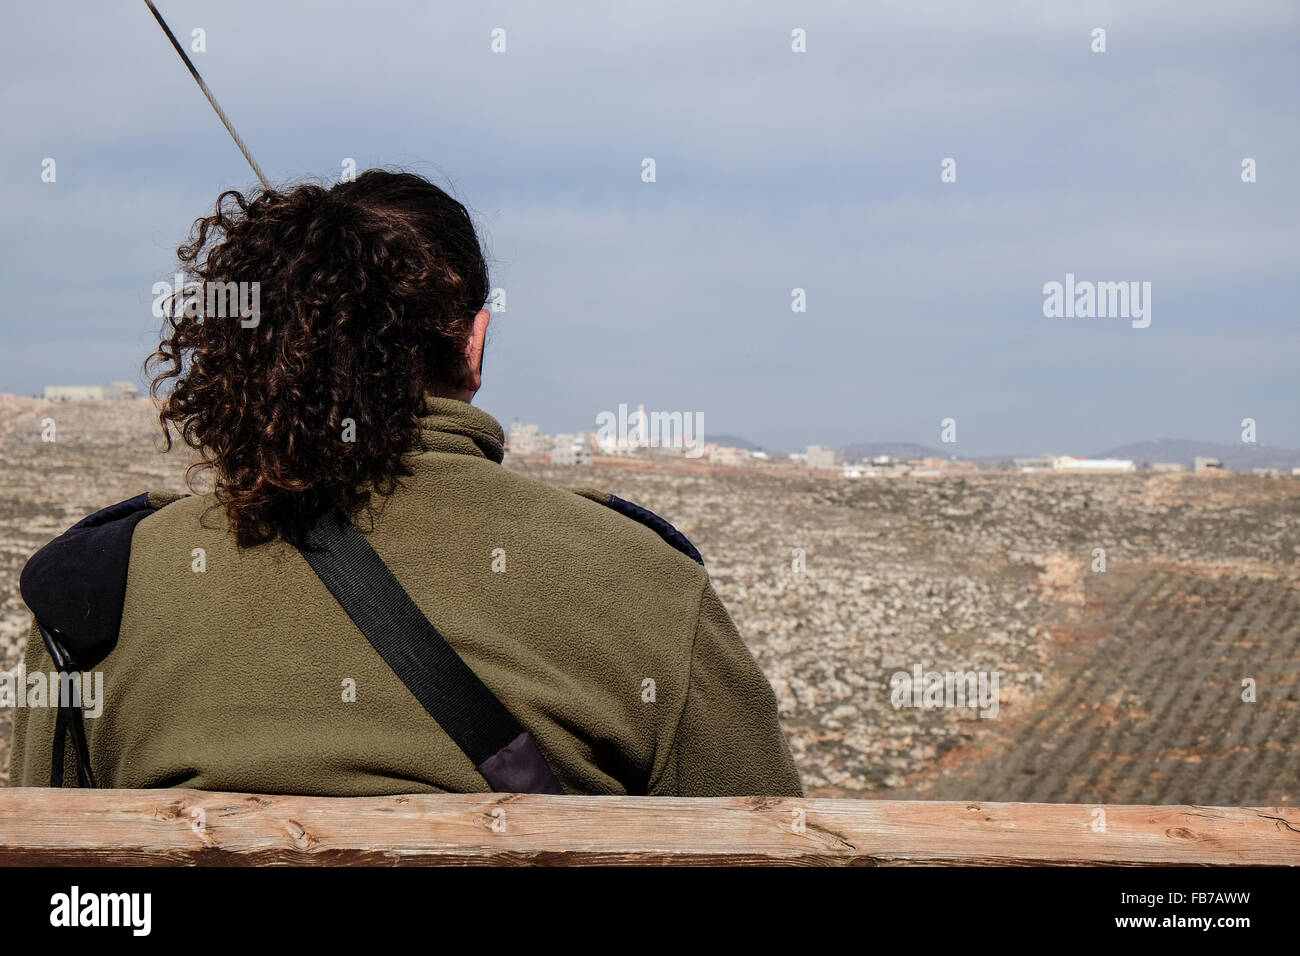 Esh Kodesh, West Bank. 11th January, 2016. An IDF officer takes a break on a bench overlooking the Palestinian village Qusra in the Esh Kodesh Israeli outpost in the West Bank near Shilo, under the jurisdiction of the Mateh Binyamin Regional Council. The settlement's guard tower is manned by IDF soldiers. The settlement was established in 1999 and is now home to some 40 families who consider it an unauthorized community of Shilo in the process of becoming formally authorized. Stock Photo